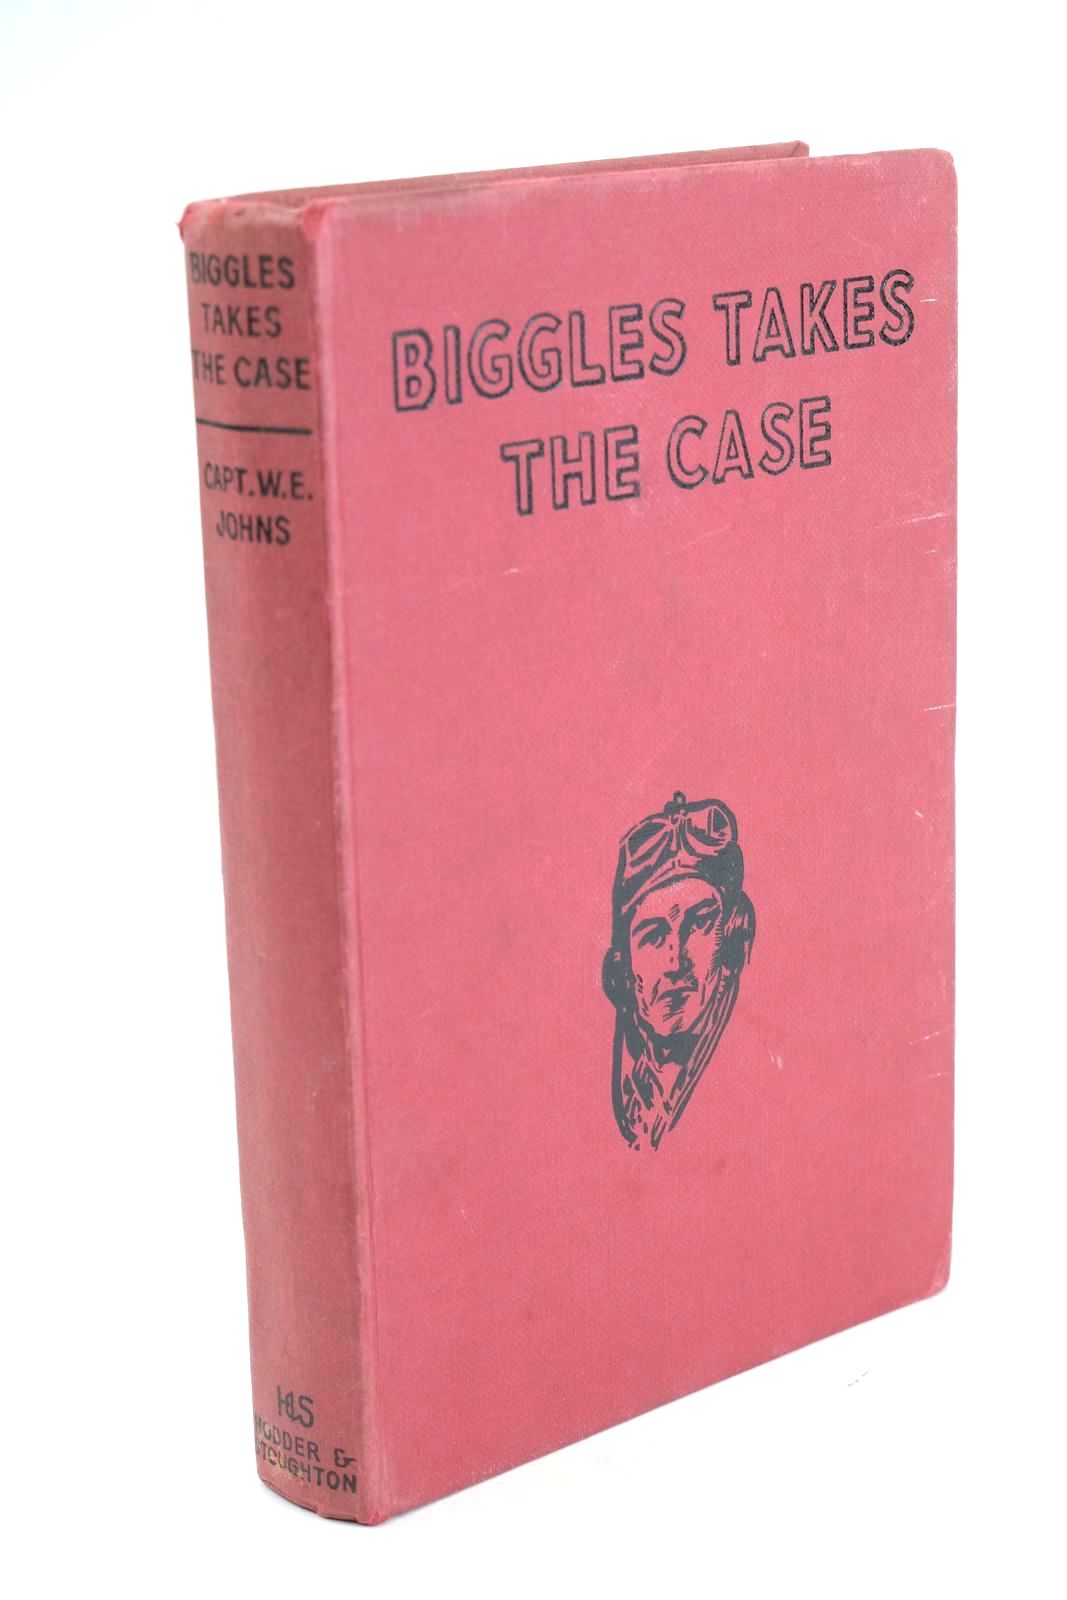 Photo of BIGGLES TAKES THE CASE written by Johns, W.E. illustrated by Stead, Leslie published by Hodder & Stoughton (STOCK CODE: 1324861)  for sale by Stella & Rose's Books